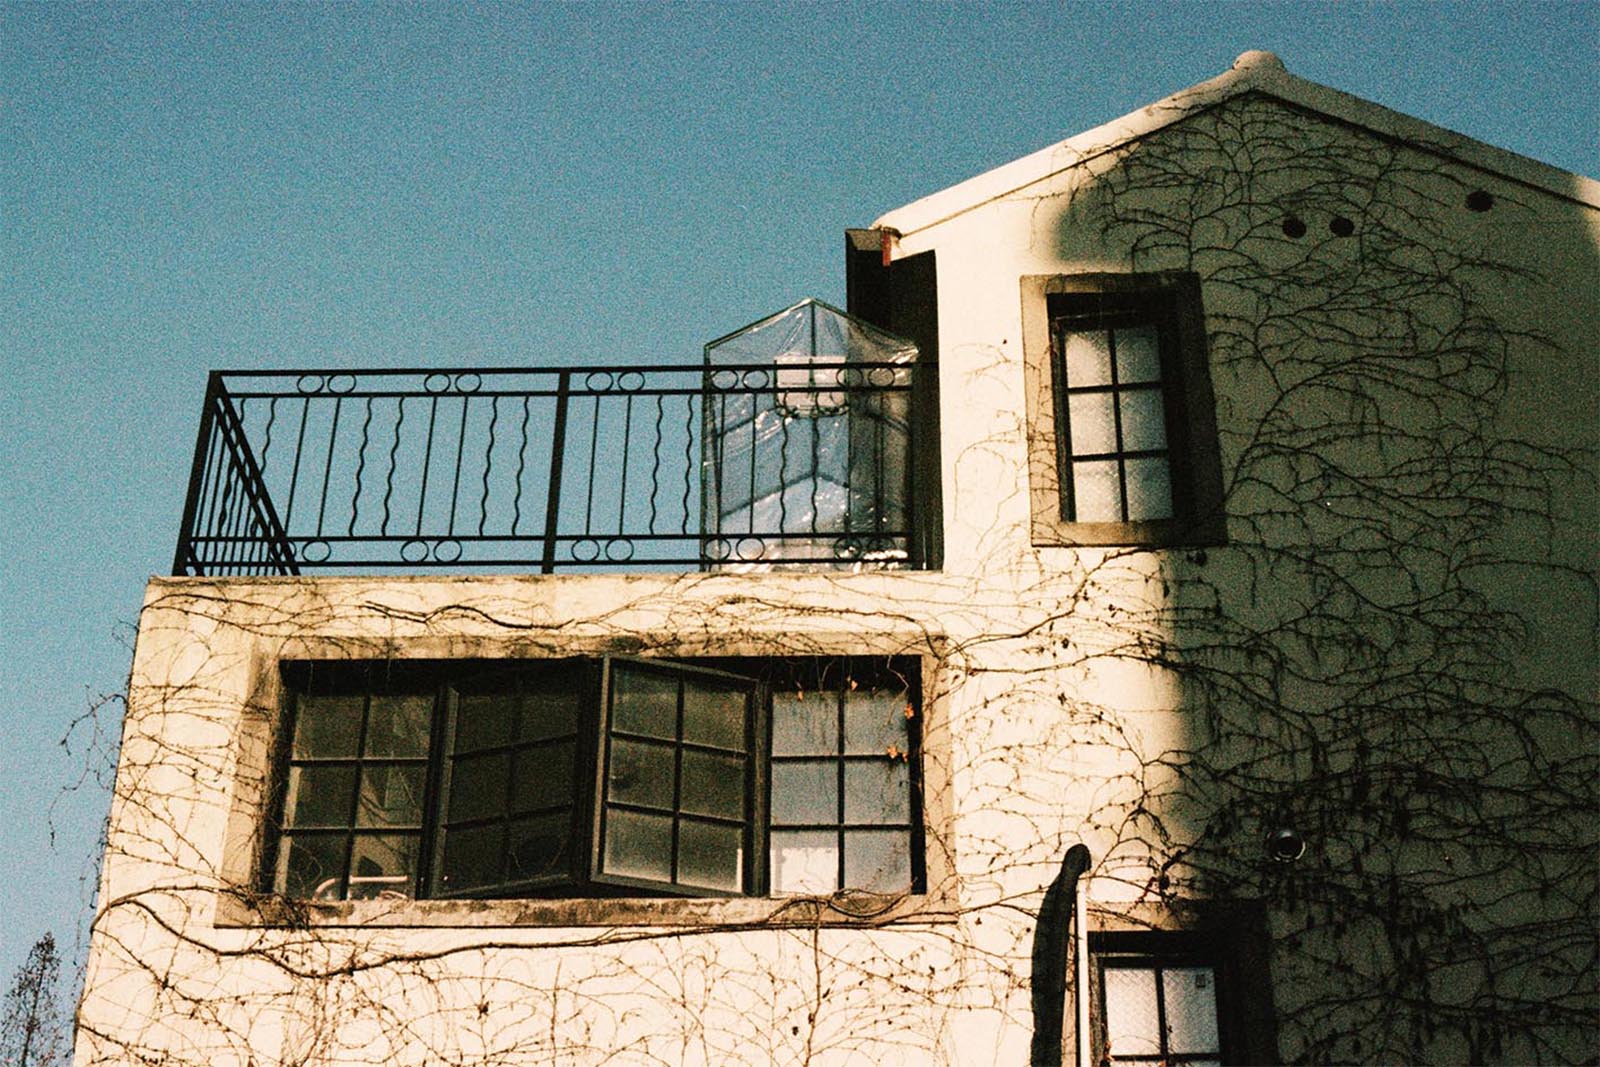 An old building facade covered in dried vines under clear skies, featuring large windows and a balcony with an ornate railing.